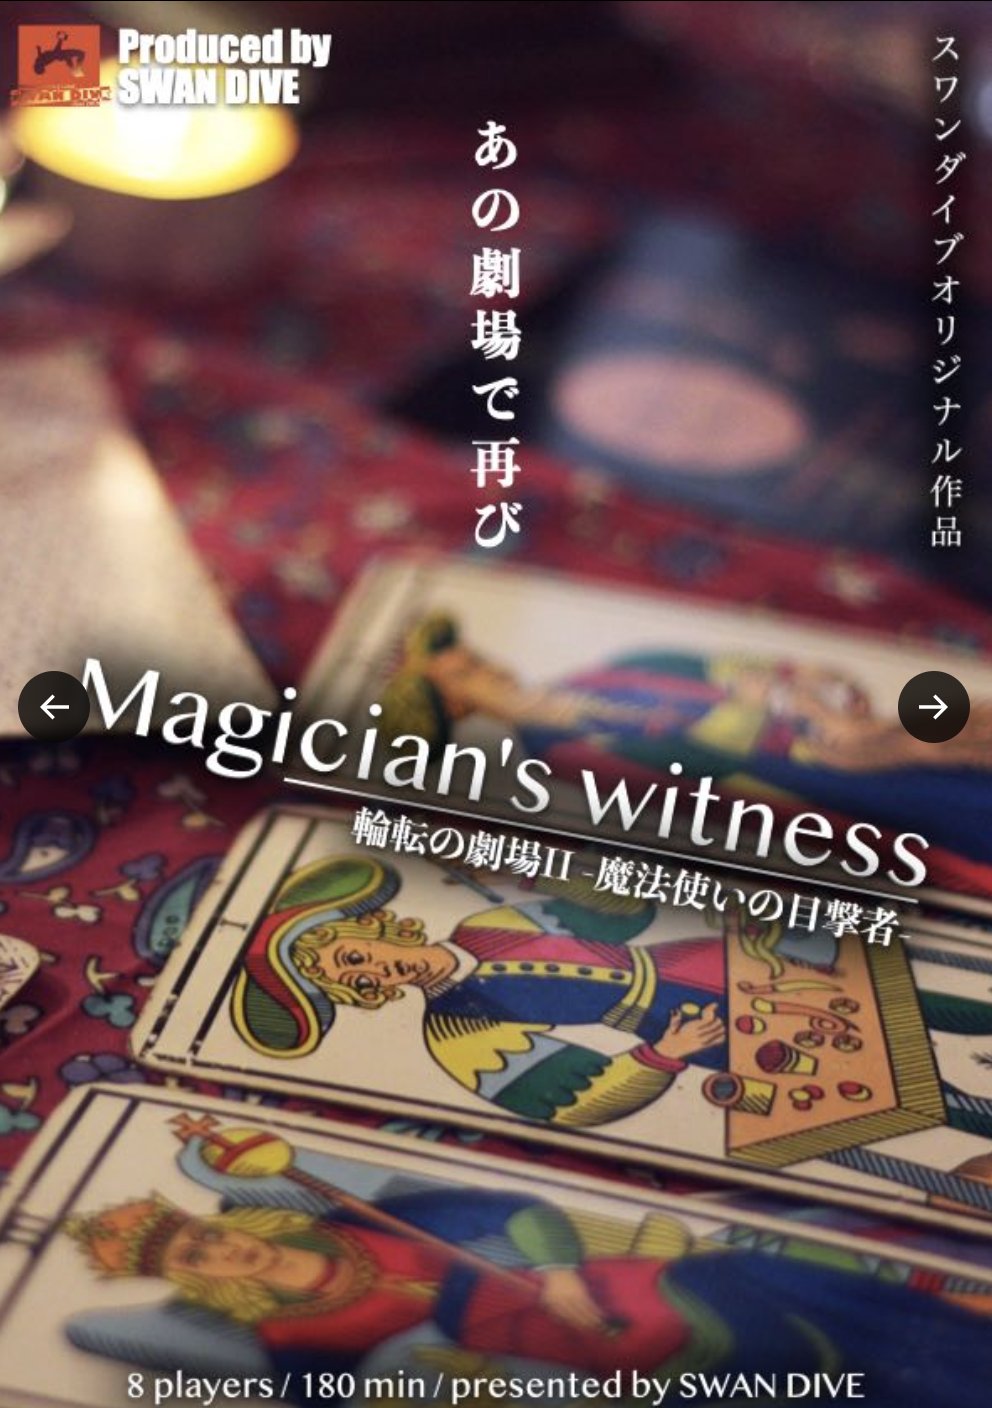 Magician's witness